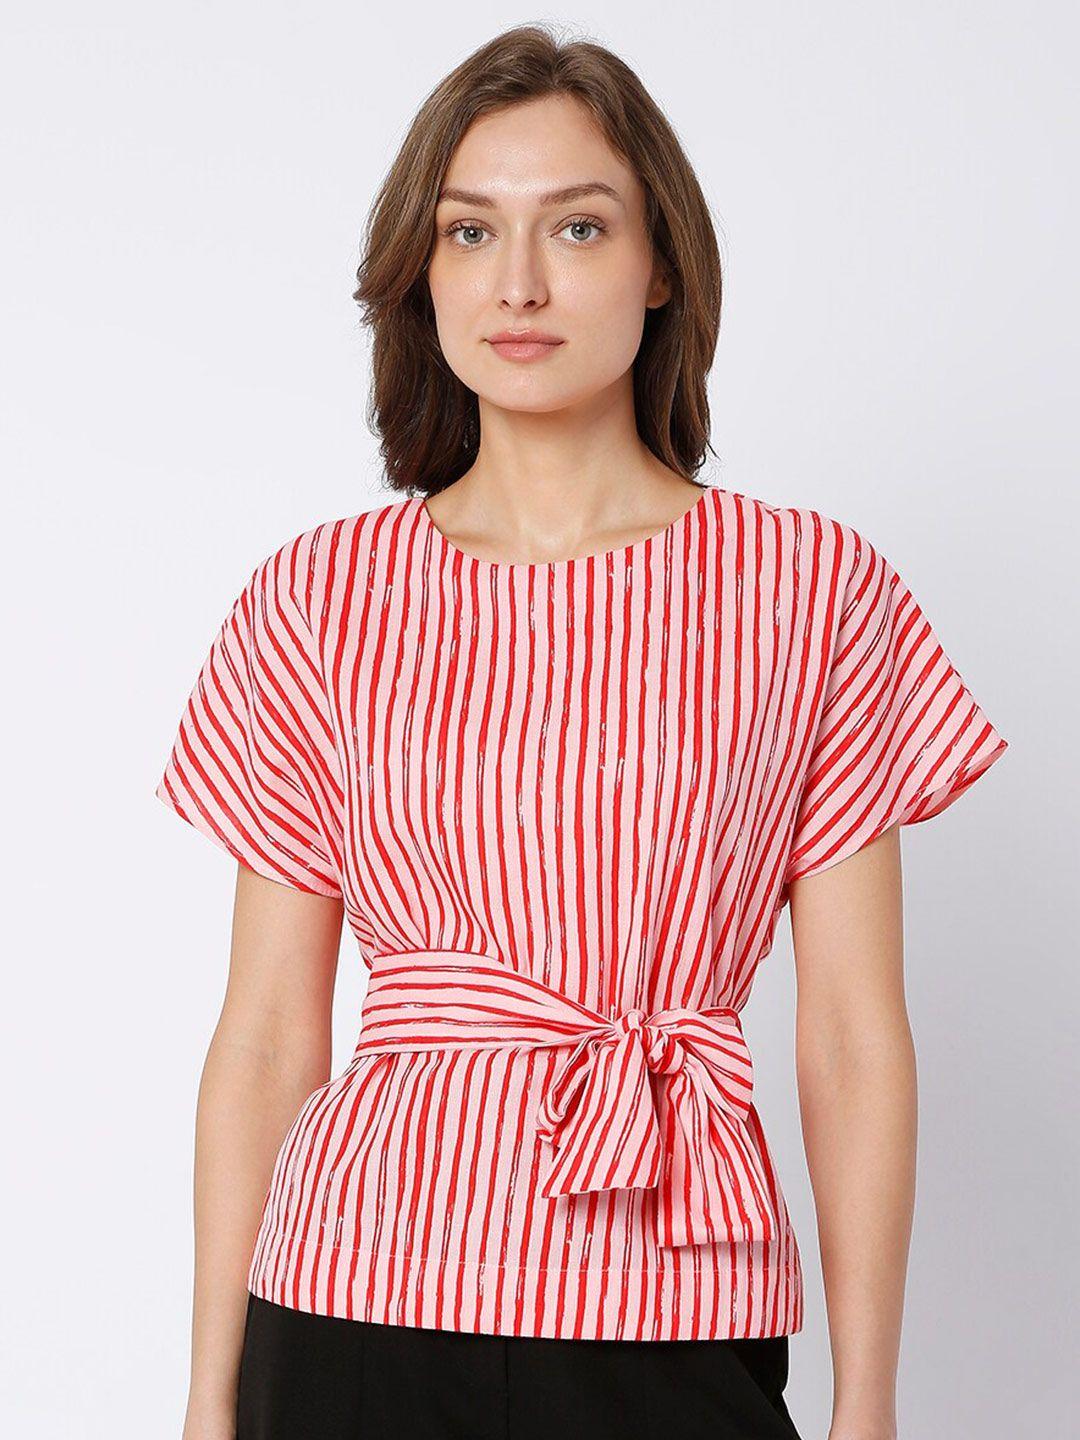 vero moda pink & white striped extended sleeves top